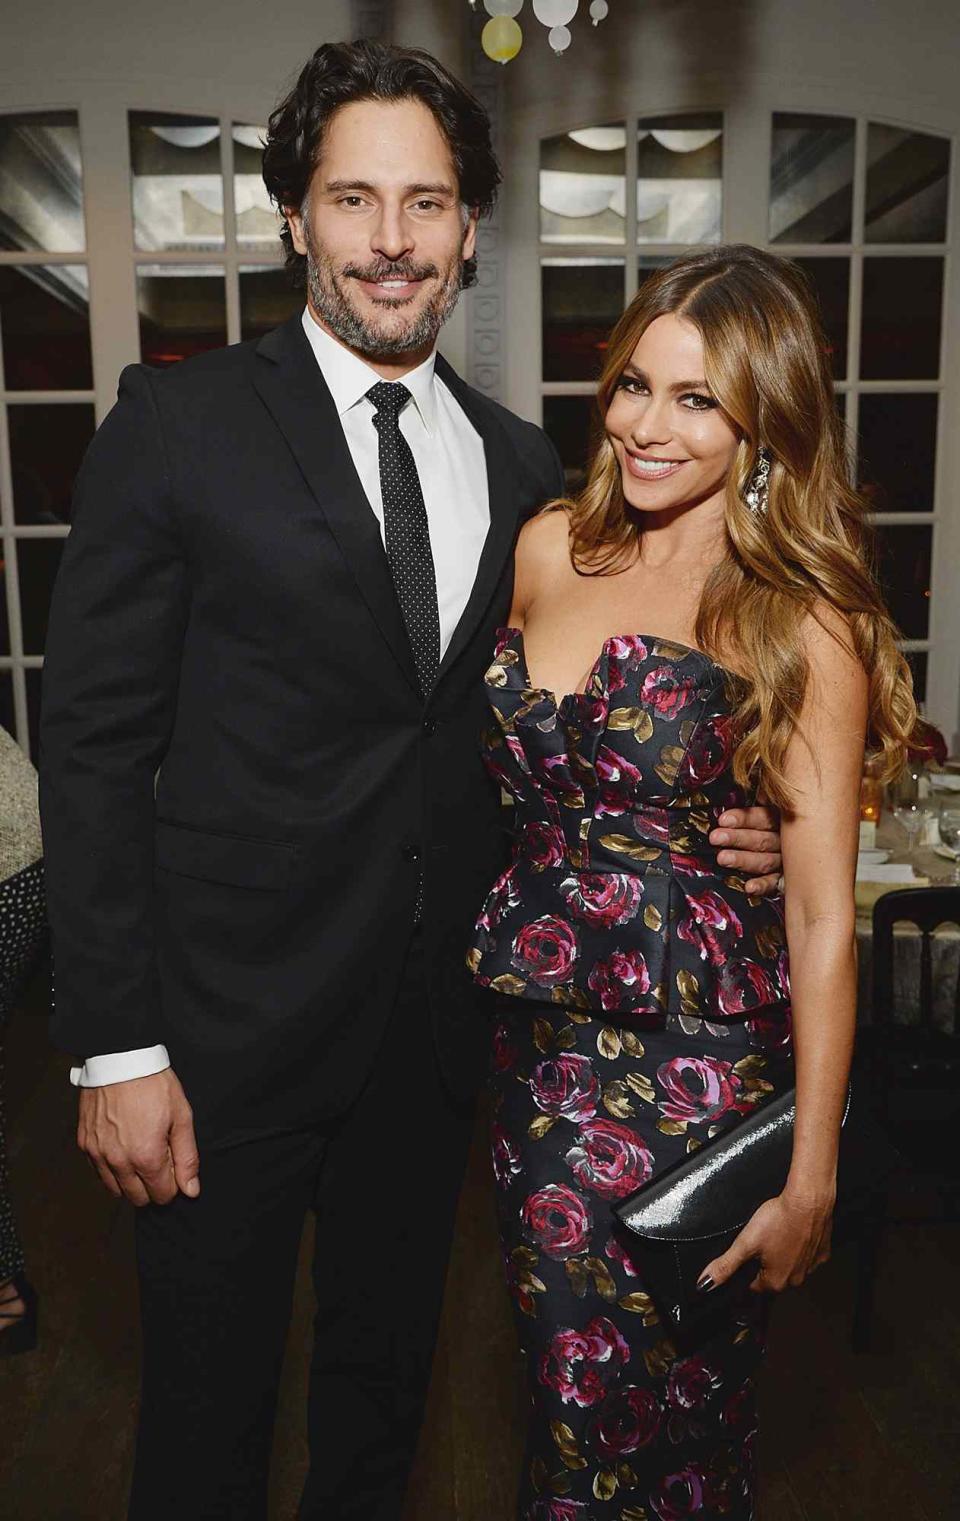 Joe Manganiello (L) and Sofia Vergara attend the celebratory dinner after the special tribute to Sophia Loren during the AFI FEST 2014 presented by Audi at Dolby Theatre on November 12, 2014 in Hollywood, California. on November 12, 2014 in Los Angeles, California